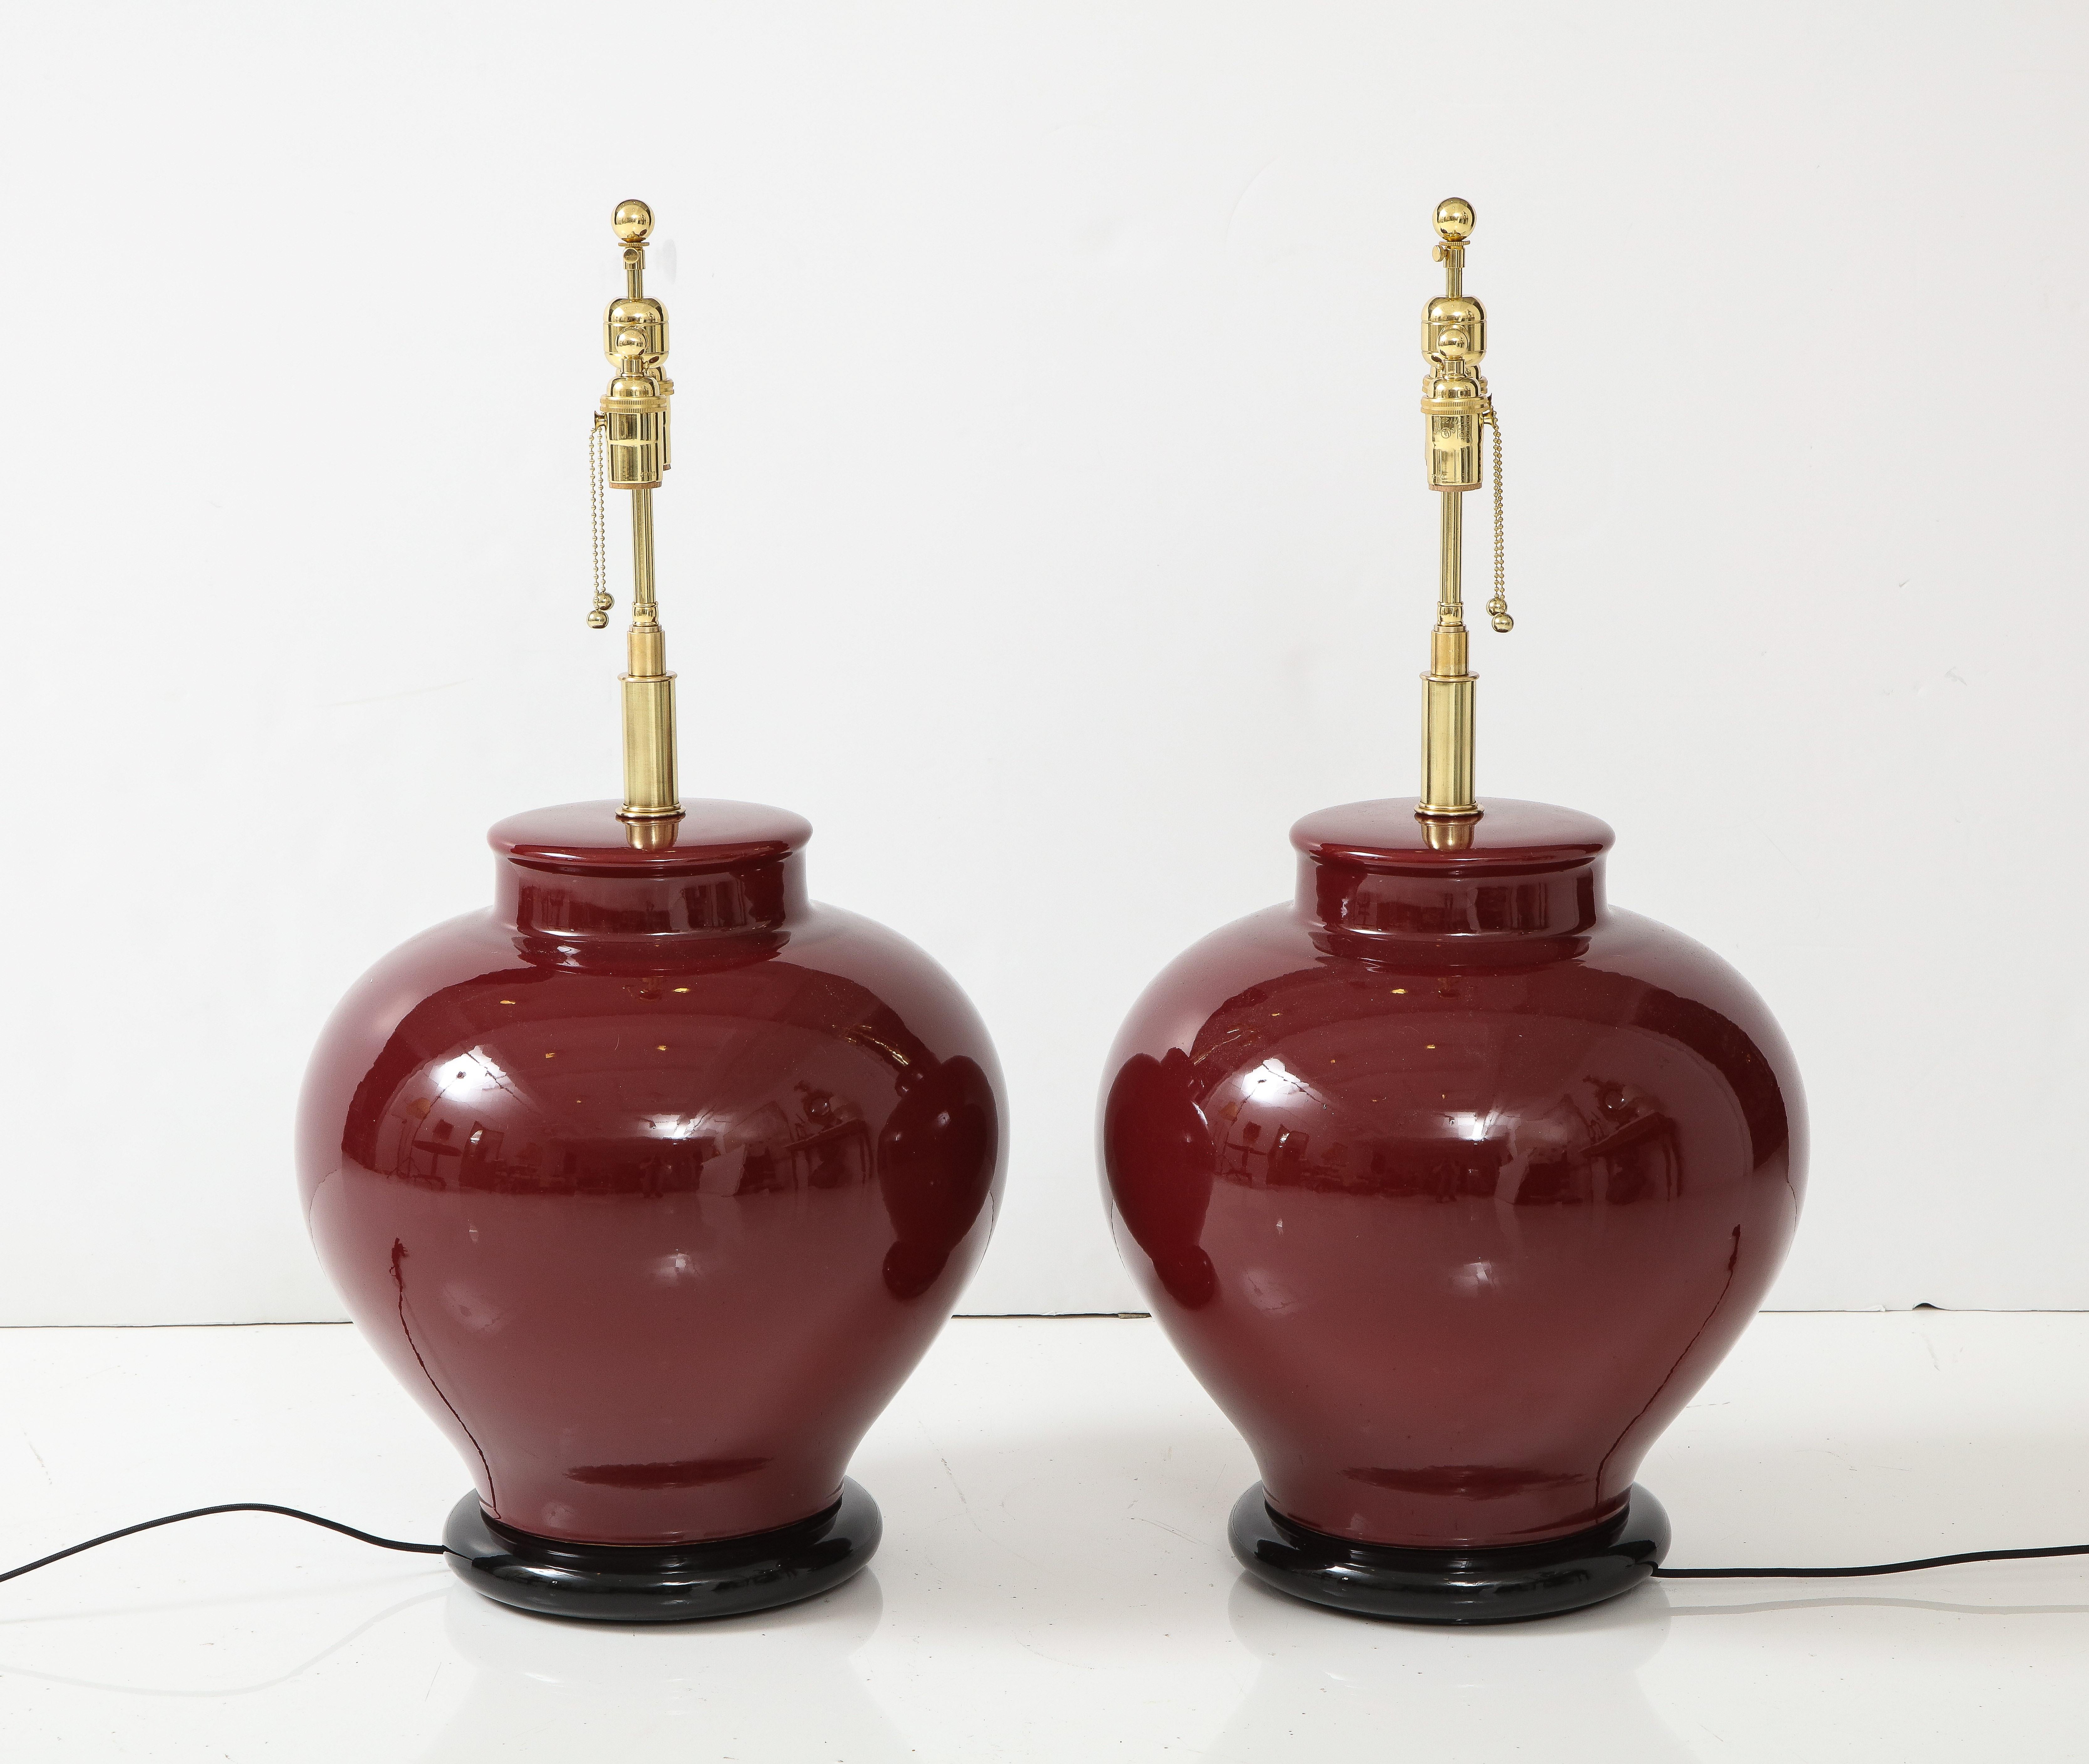 Brass Pair of Large Ceramic Lamps with a Rich Burgundy Glaze Finish For Sale